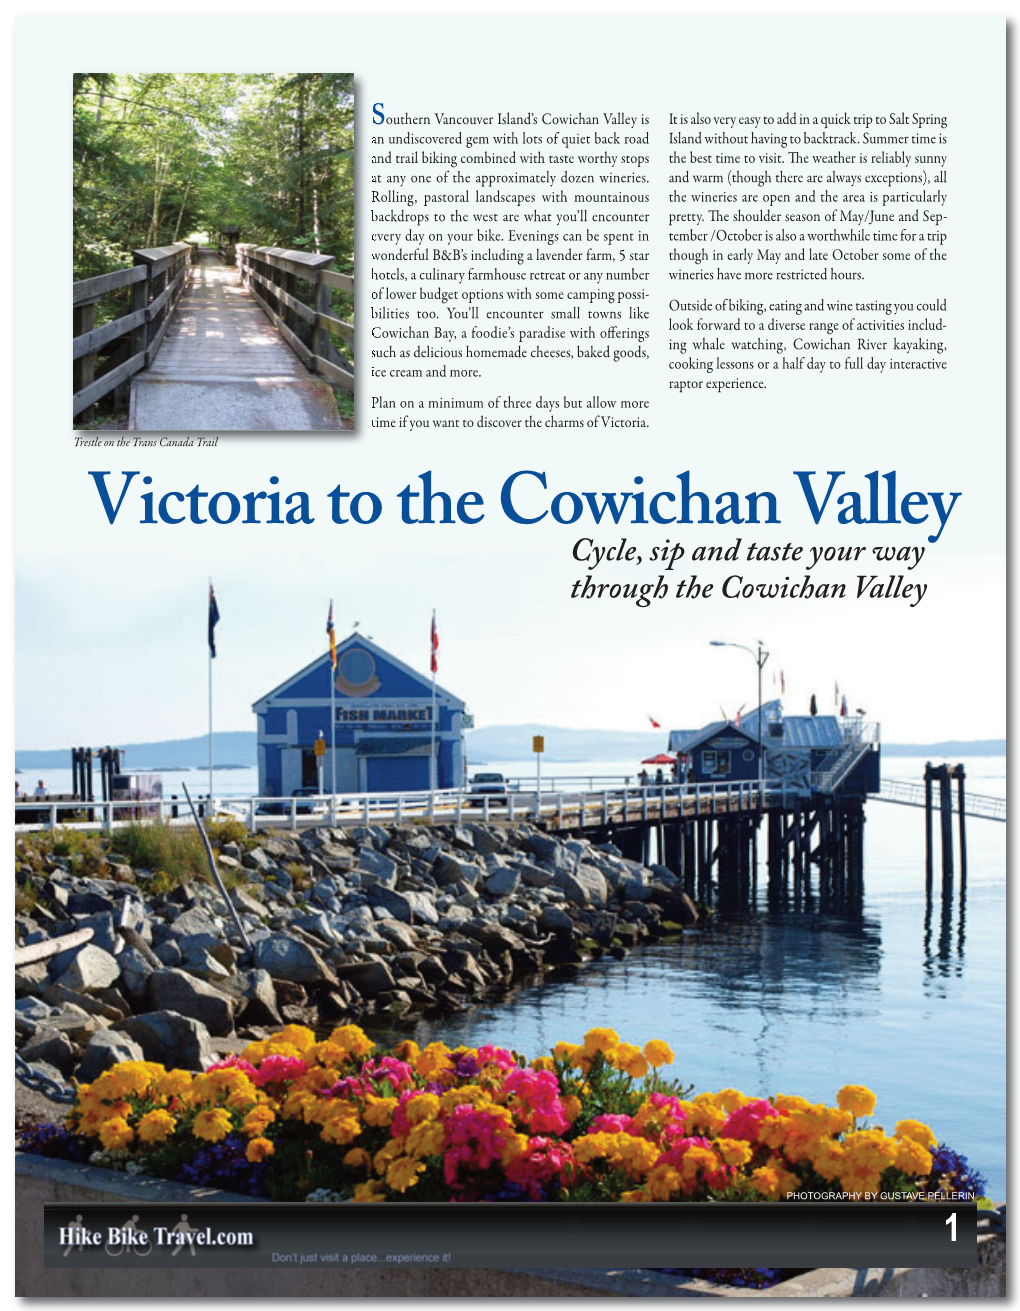 Victoria to the Cowichan Valley Cycle, Sip and Taste Your Way Through the Cowichan Valley